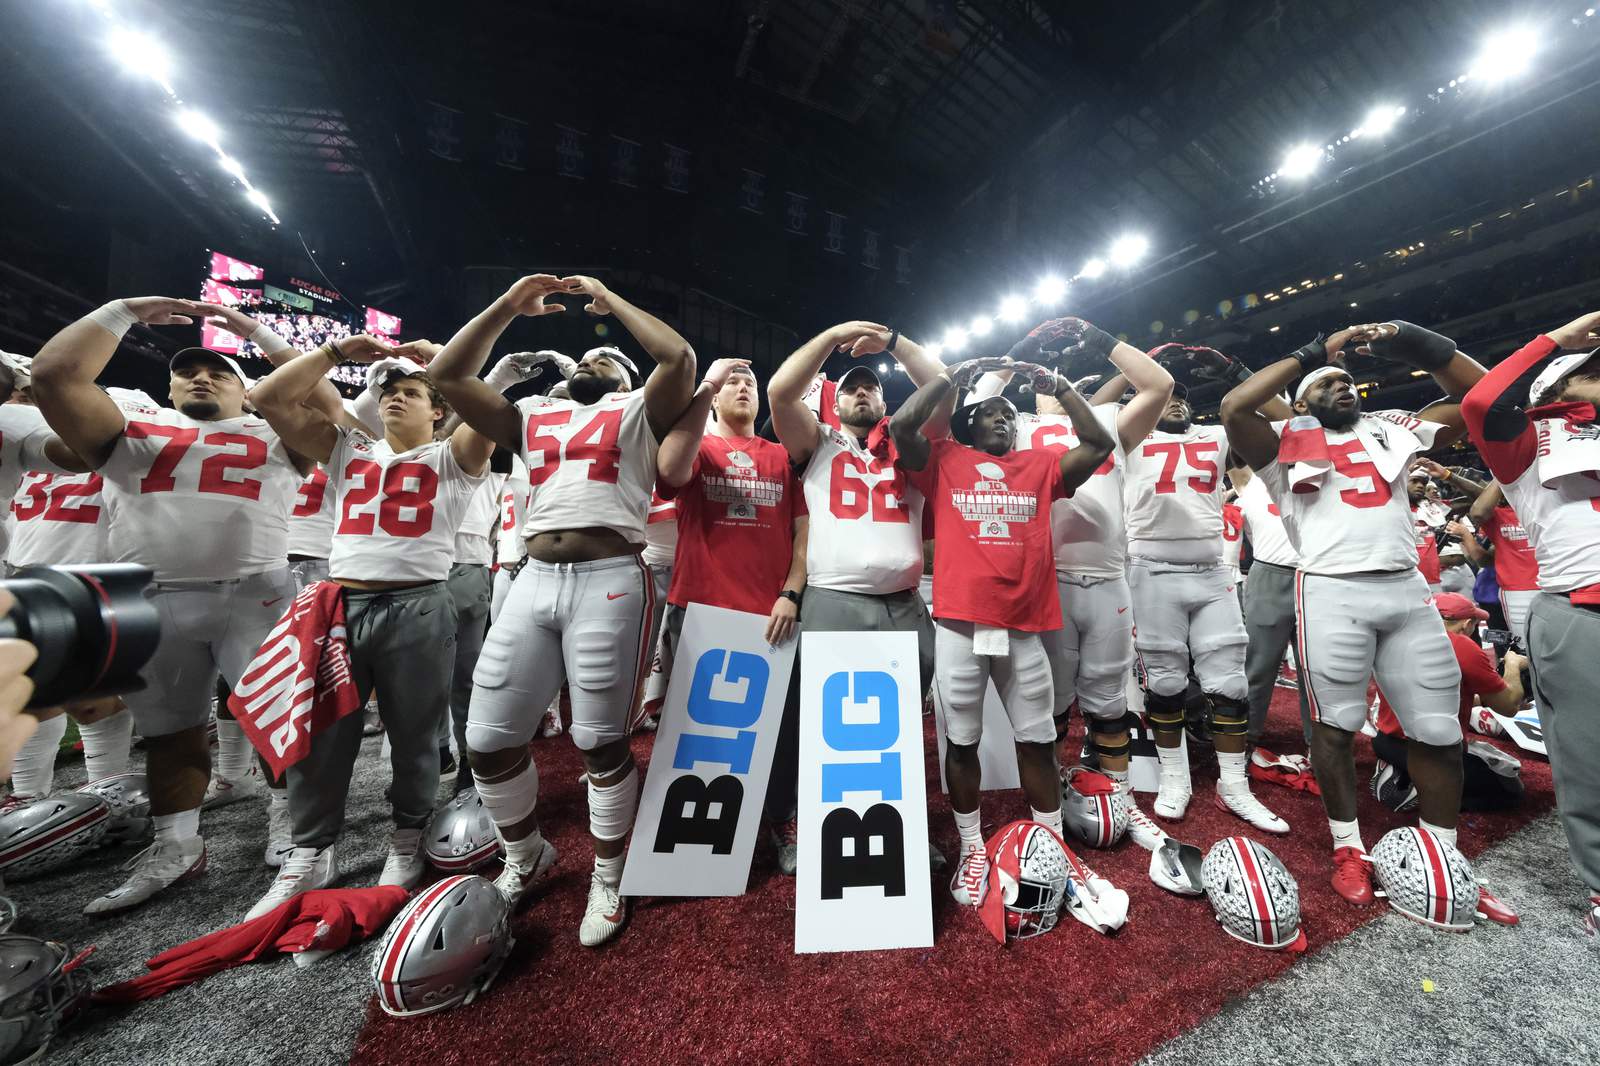 Big Ten audible: Ohio State will play for title vs Wildcats